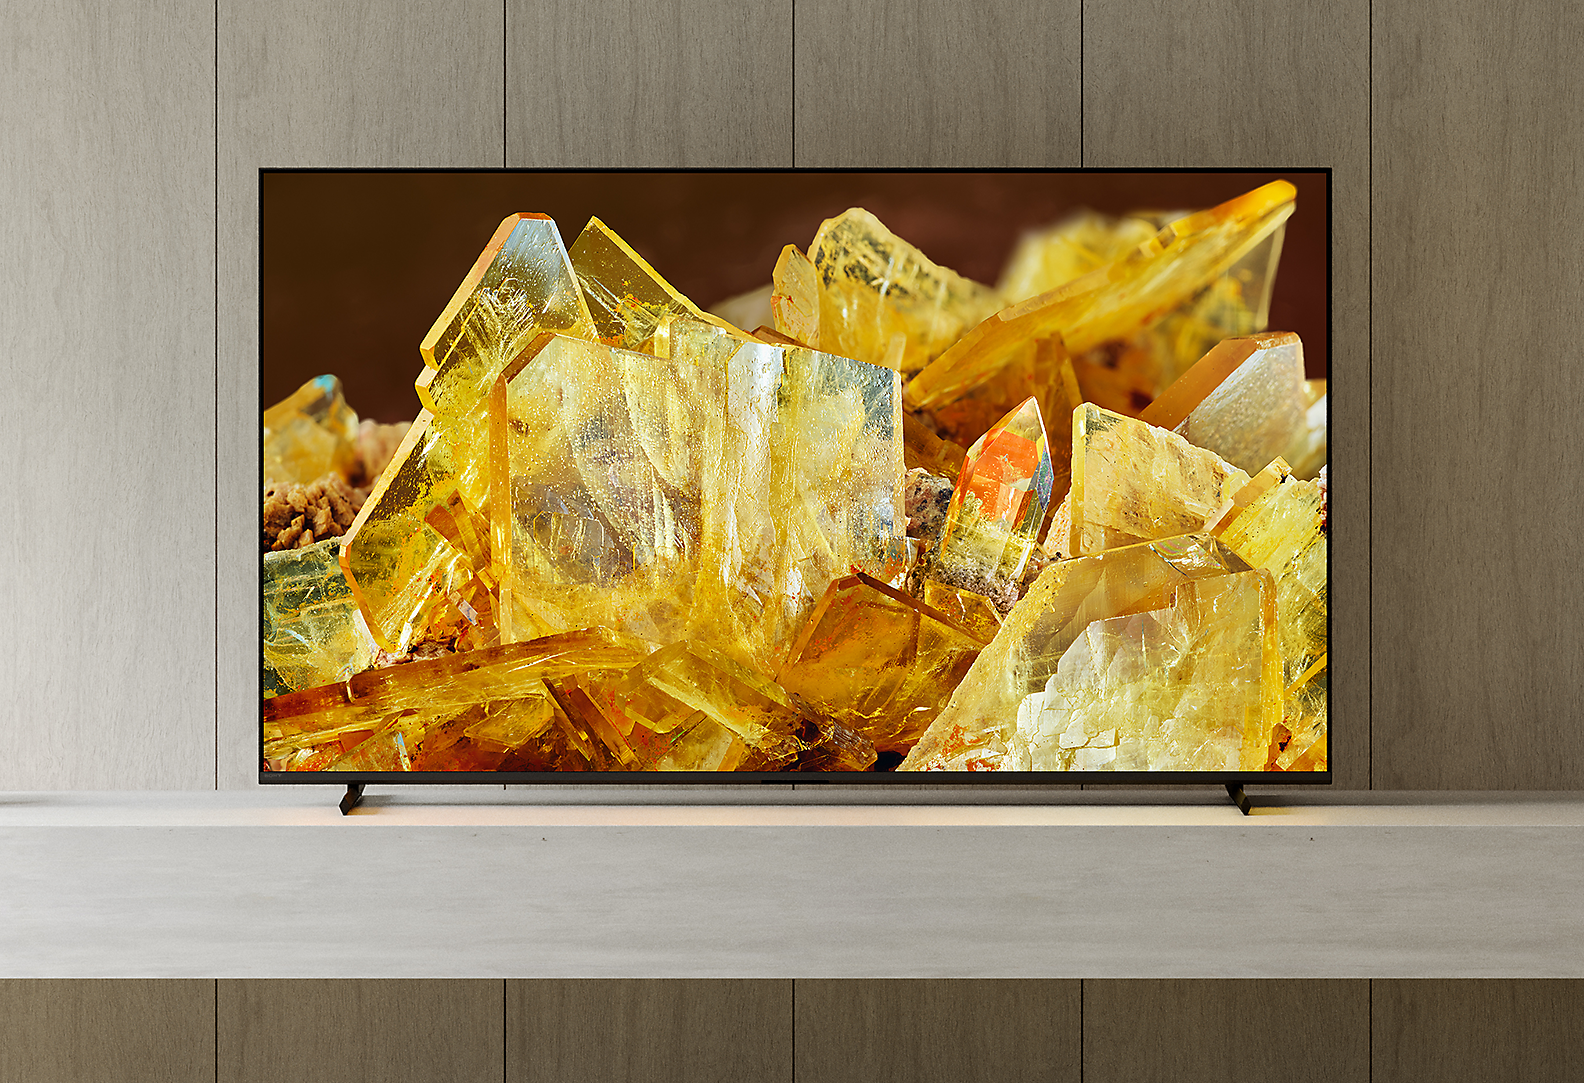 BRAVIA X90L in living room with statues and plant beside TV and golden crystals on screen